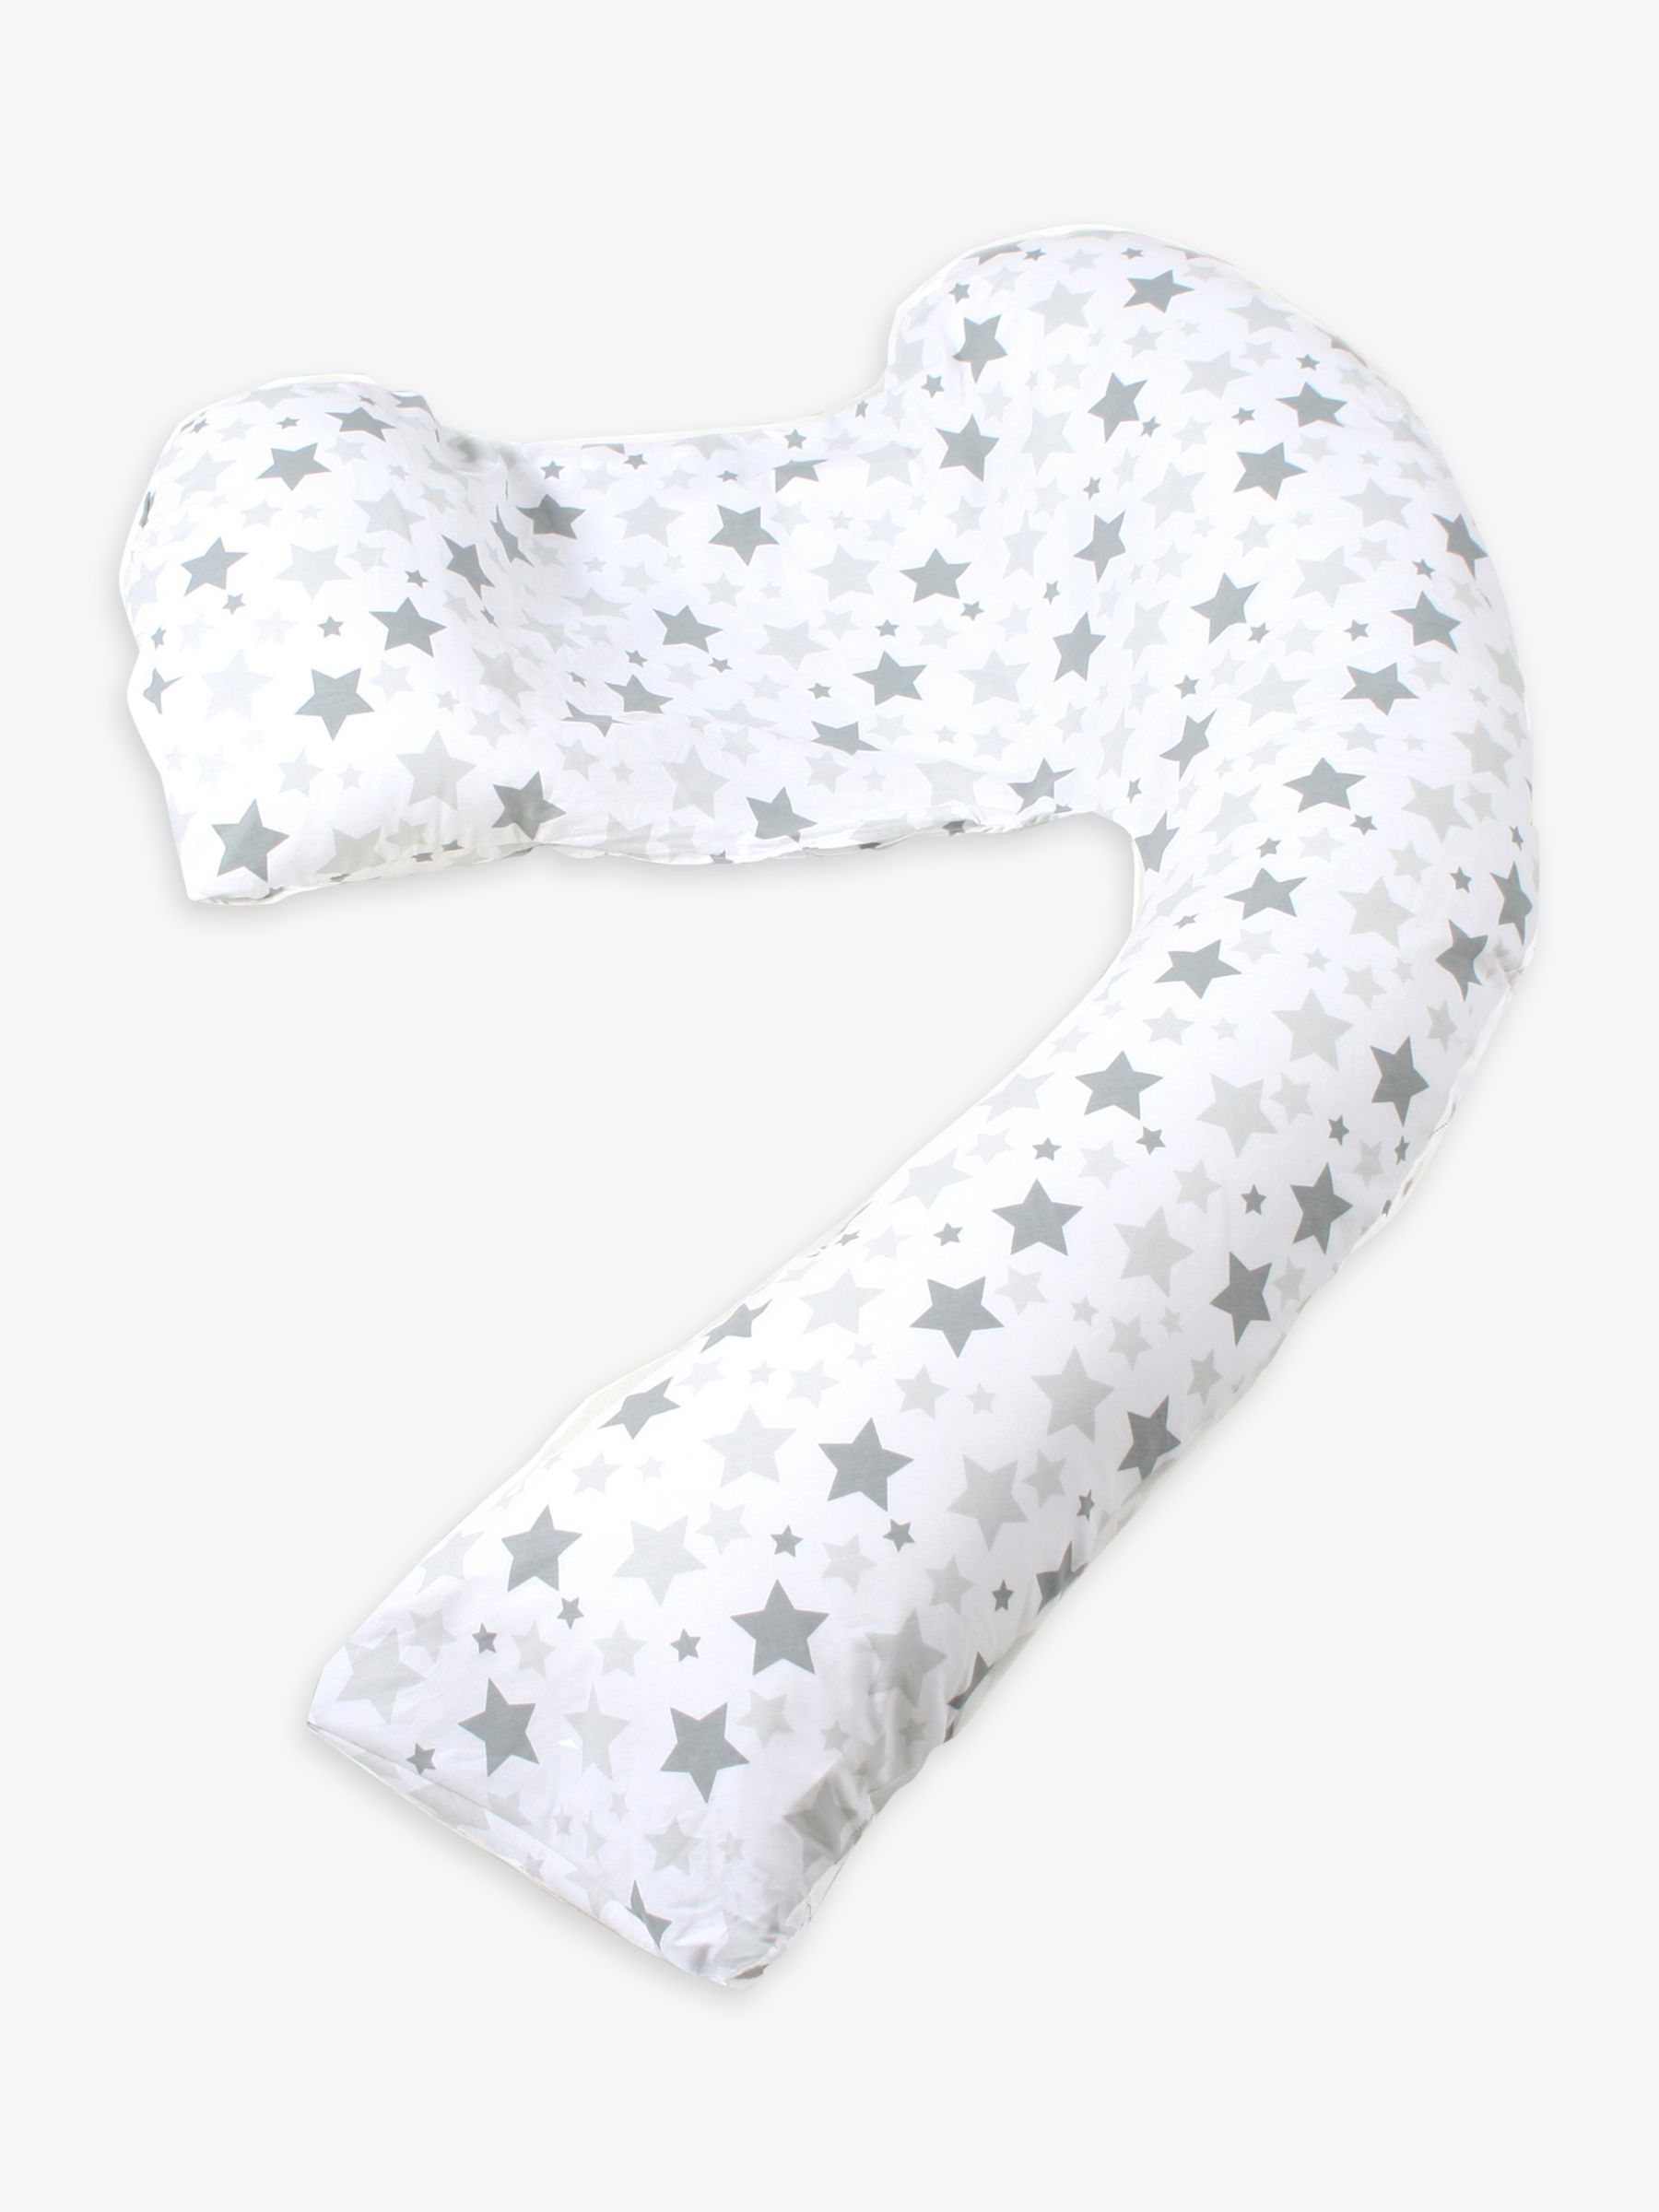 Image of Dreamgenii Star Pregnancy Support Pillow